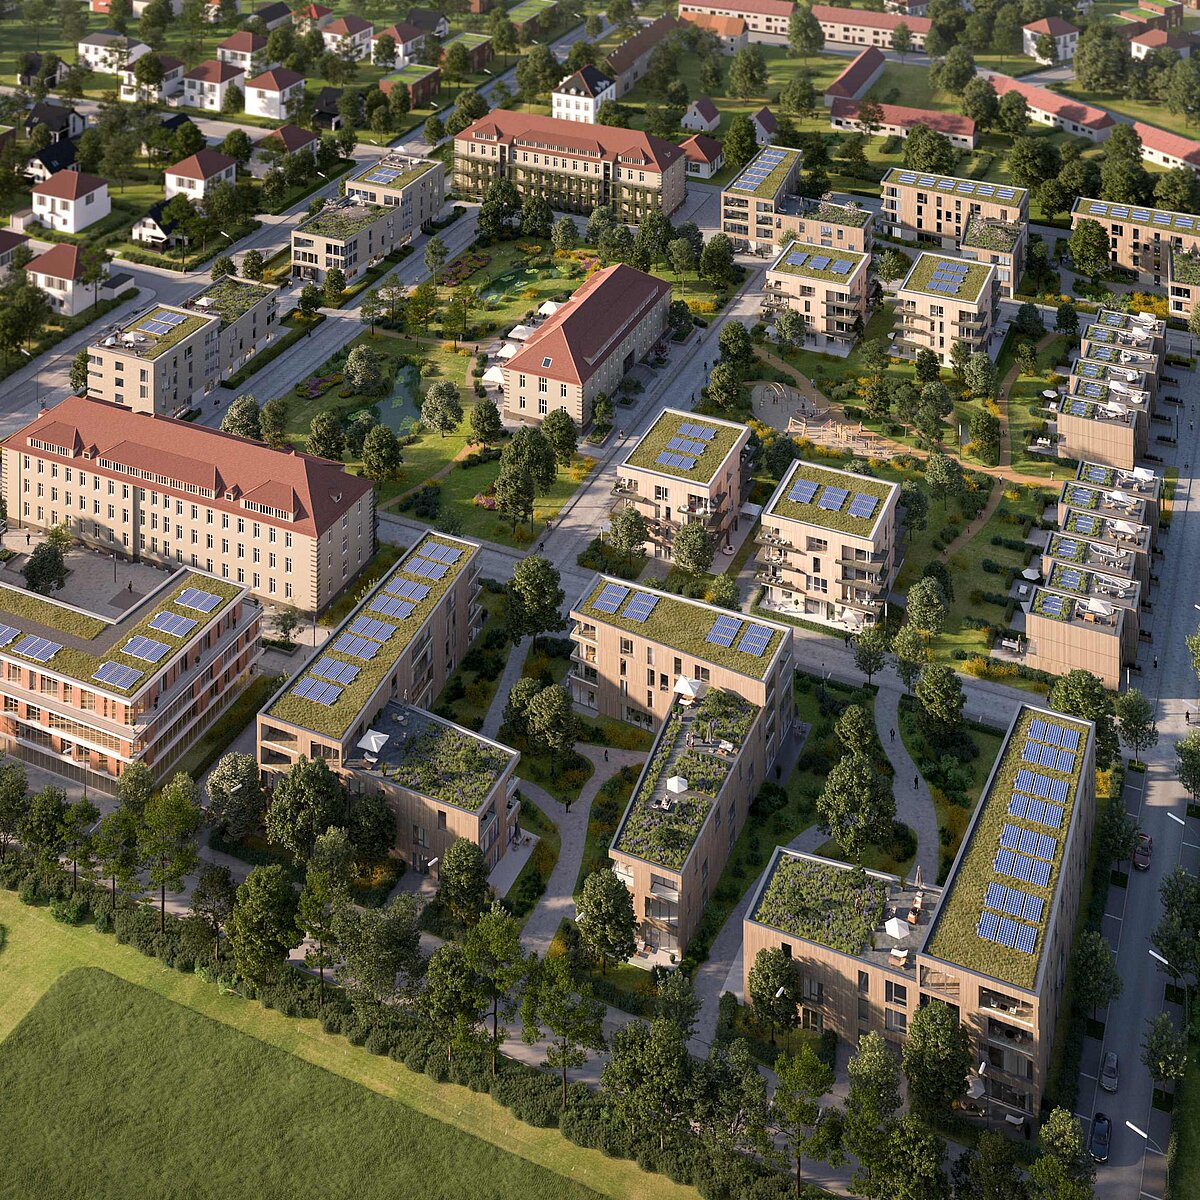 Aerial view: Property with around 51,700 square meters in Stahnsdorf